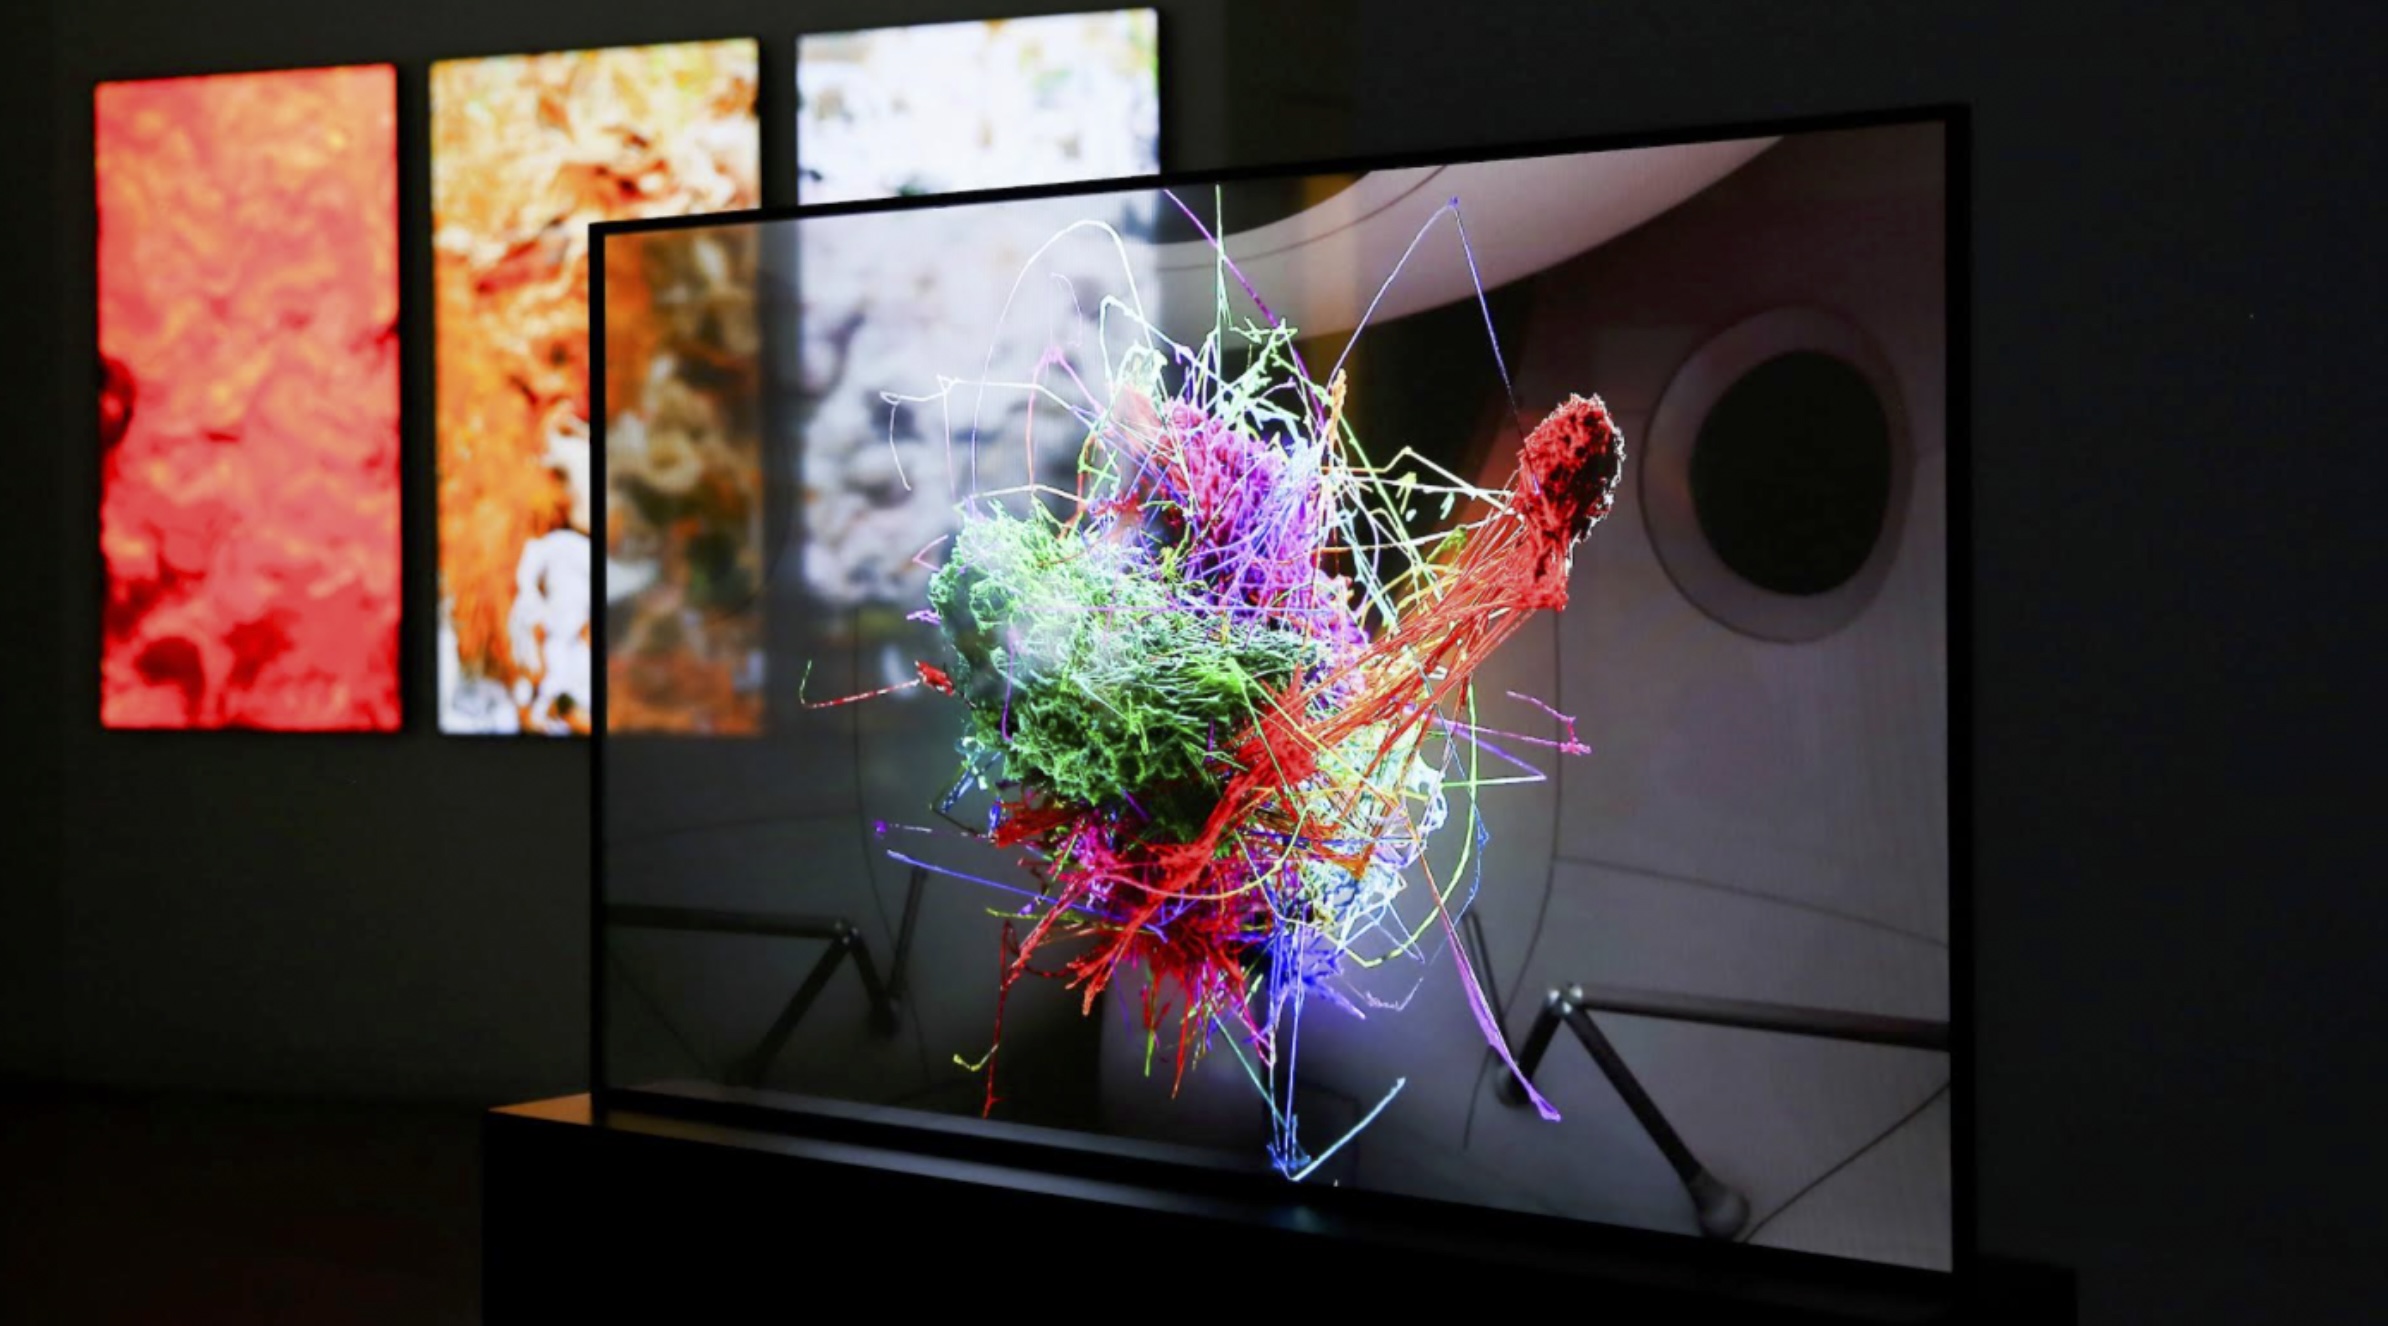 Your LG TV can now let you buy and sell digital artwork